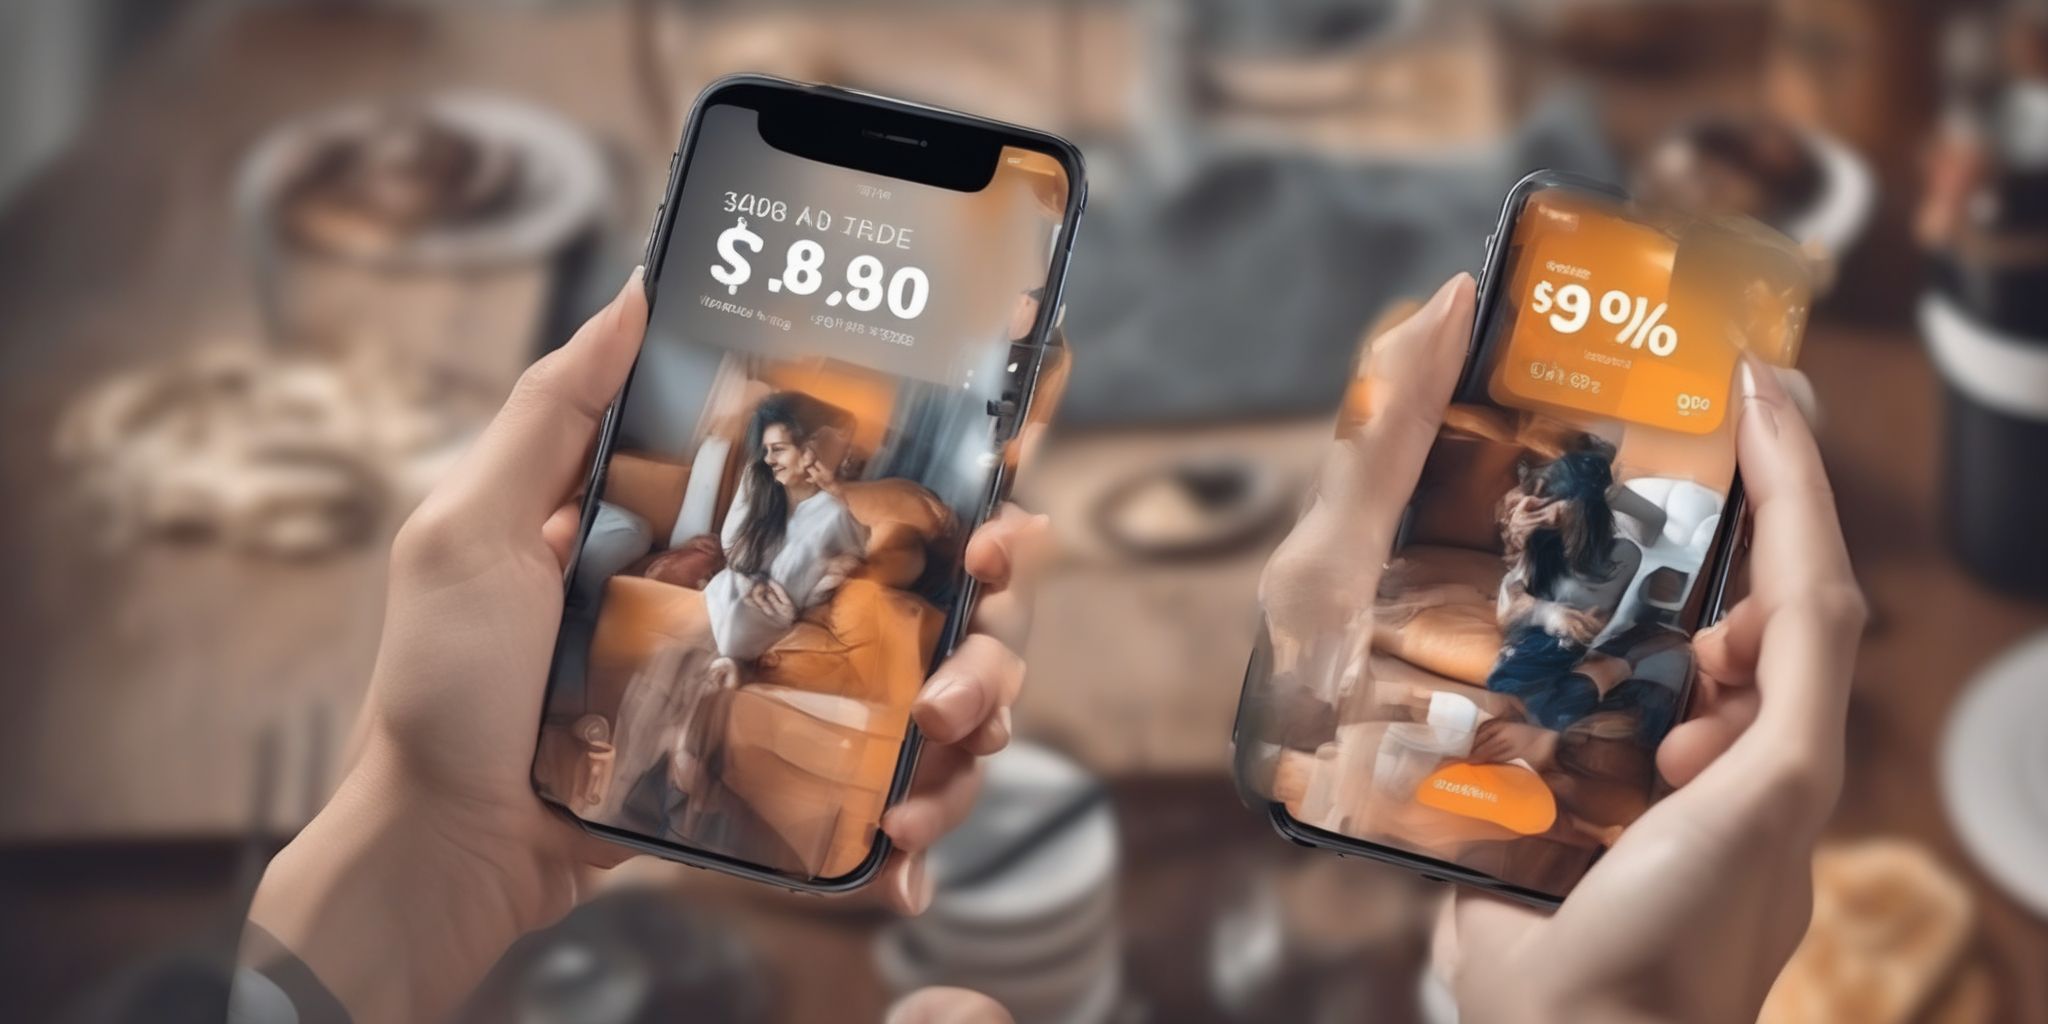 Discount app  in realistic, photographic style